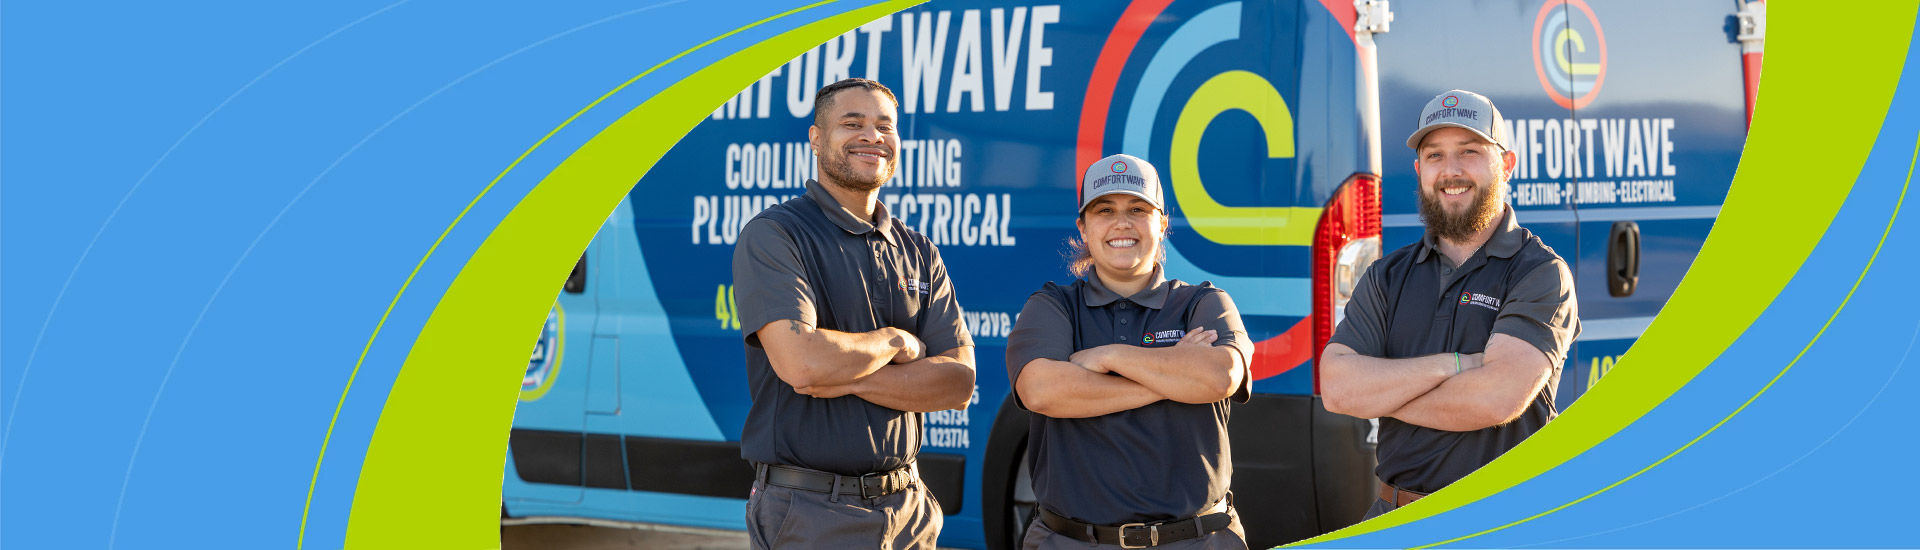 Comfort Wave HVAC techs in front of a service vehicle